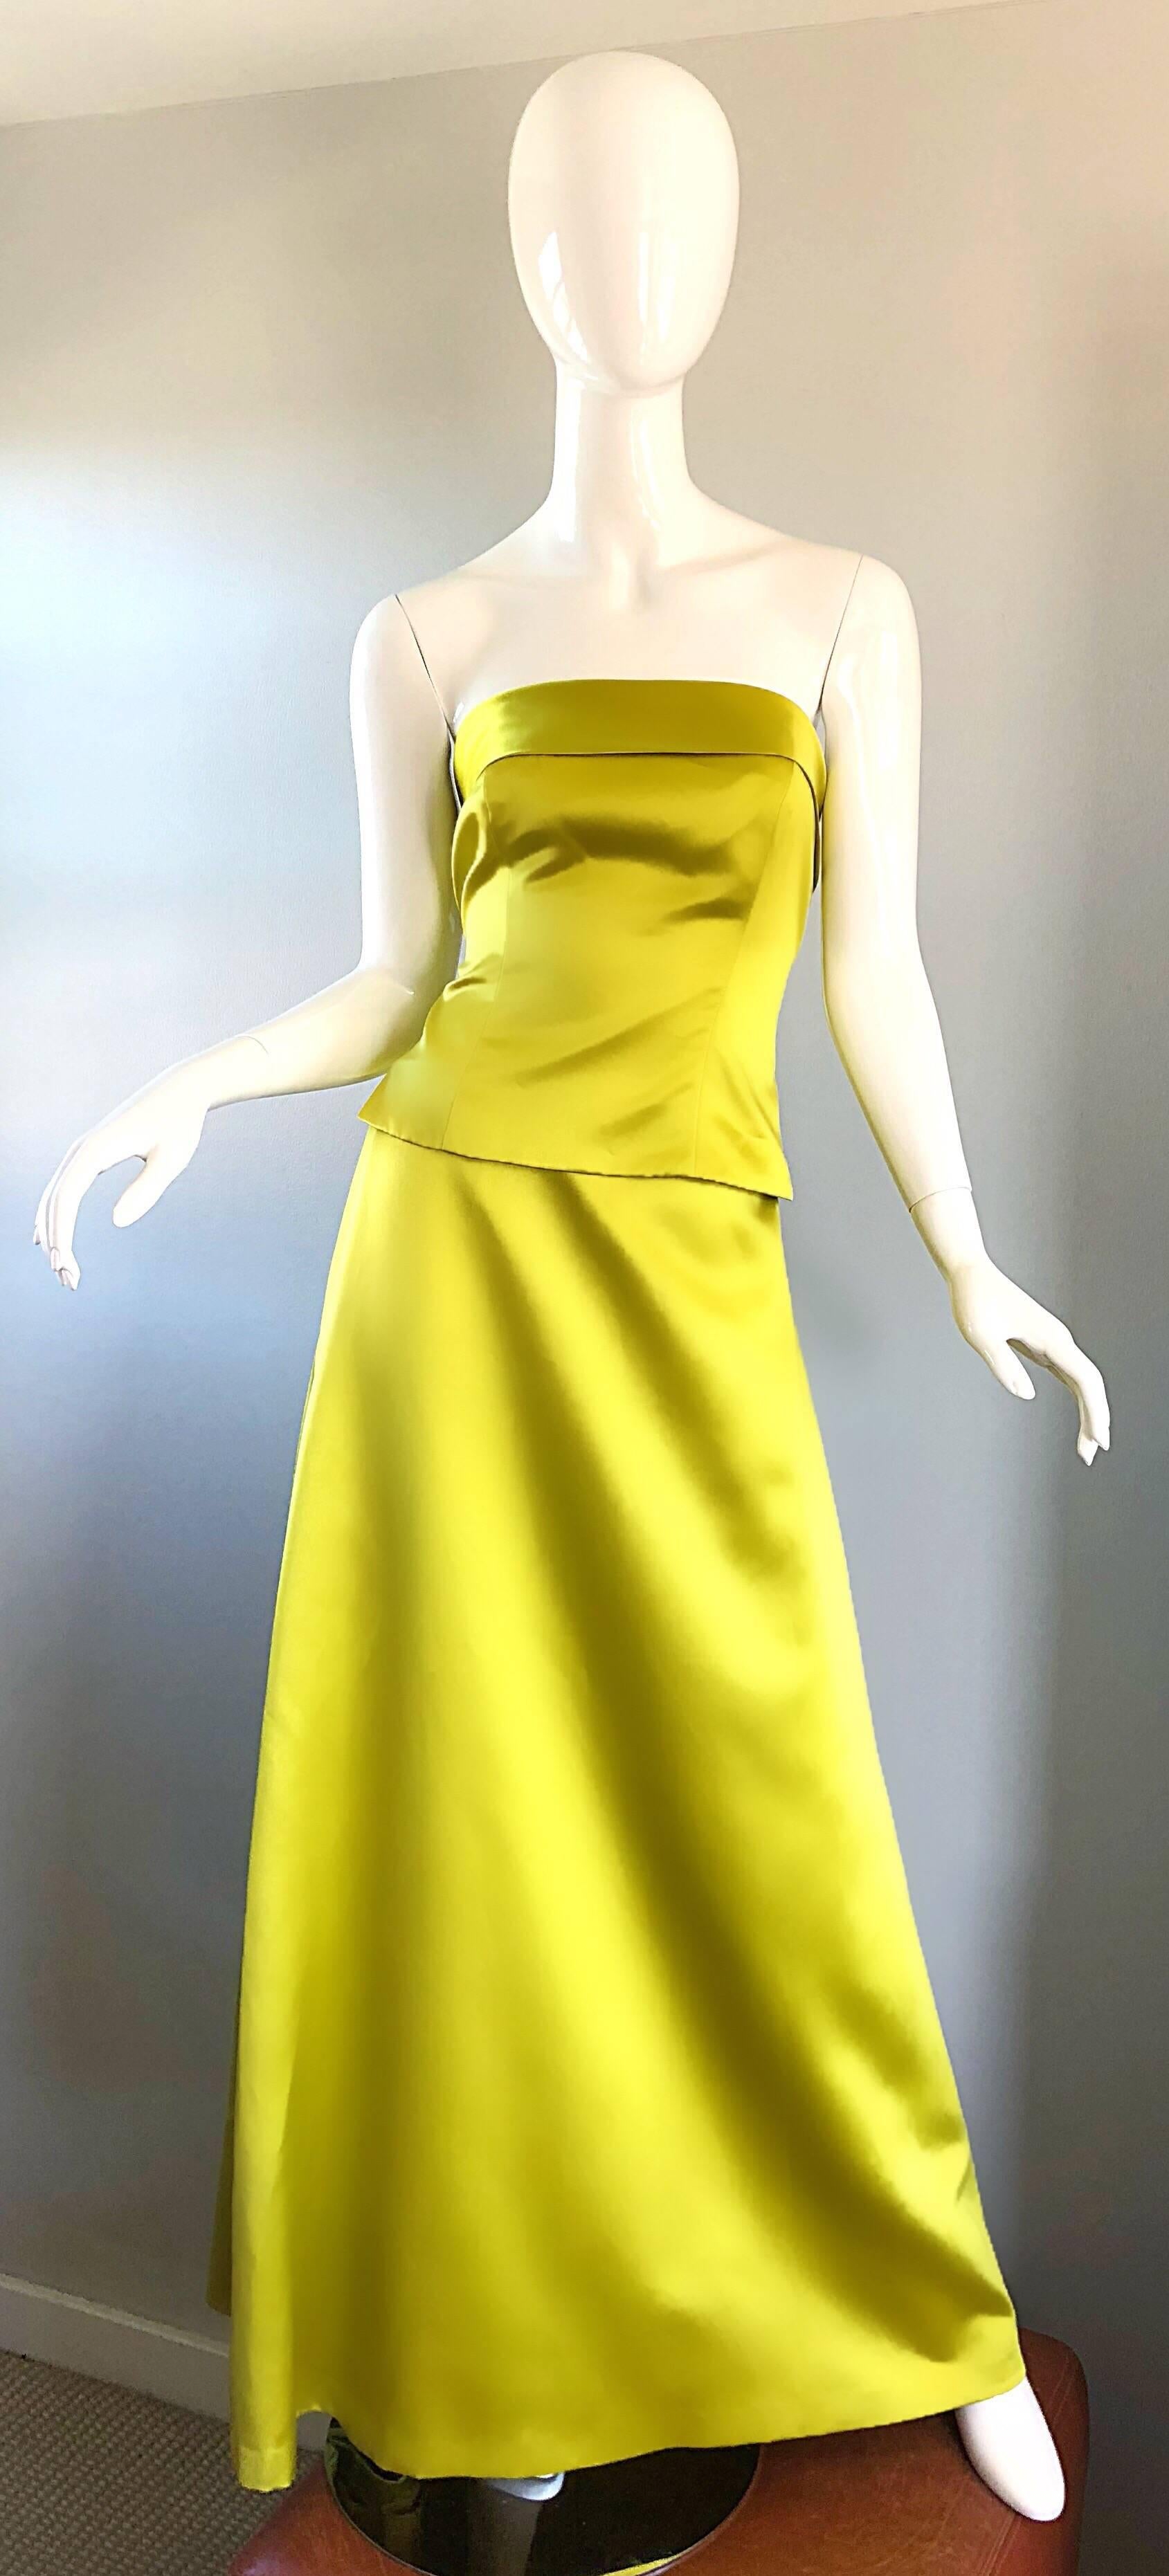 Gorgeous vintage 90s VERA WANG chartreuse yellow/green two piece satin evening gown ensemble! Features a fitted corset with a full hidden zipper up the back with hook-and-eye closures. Flattering forgiving full skirt features a zipper up the side